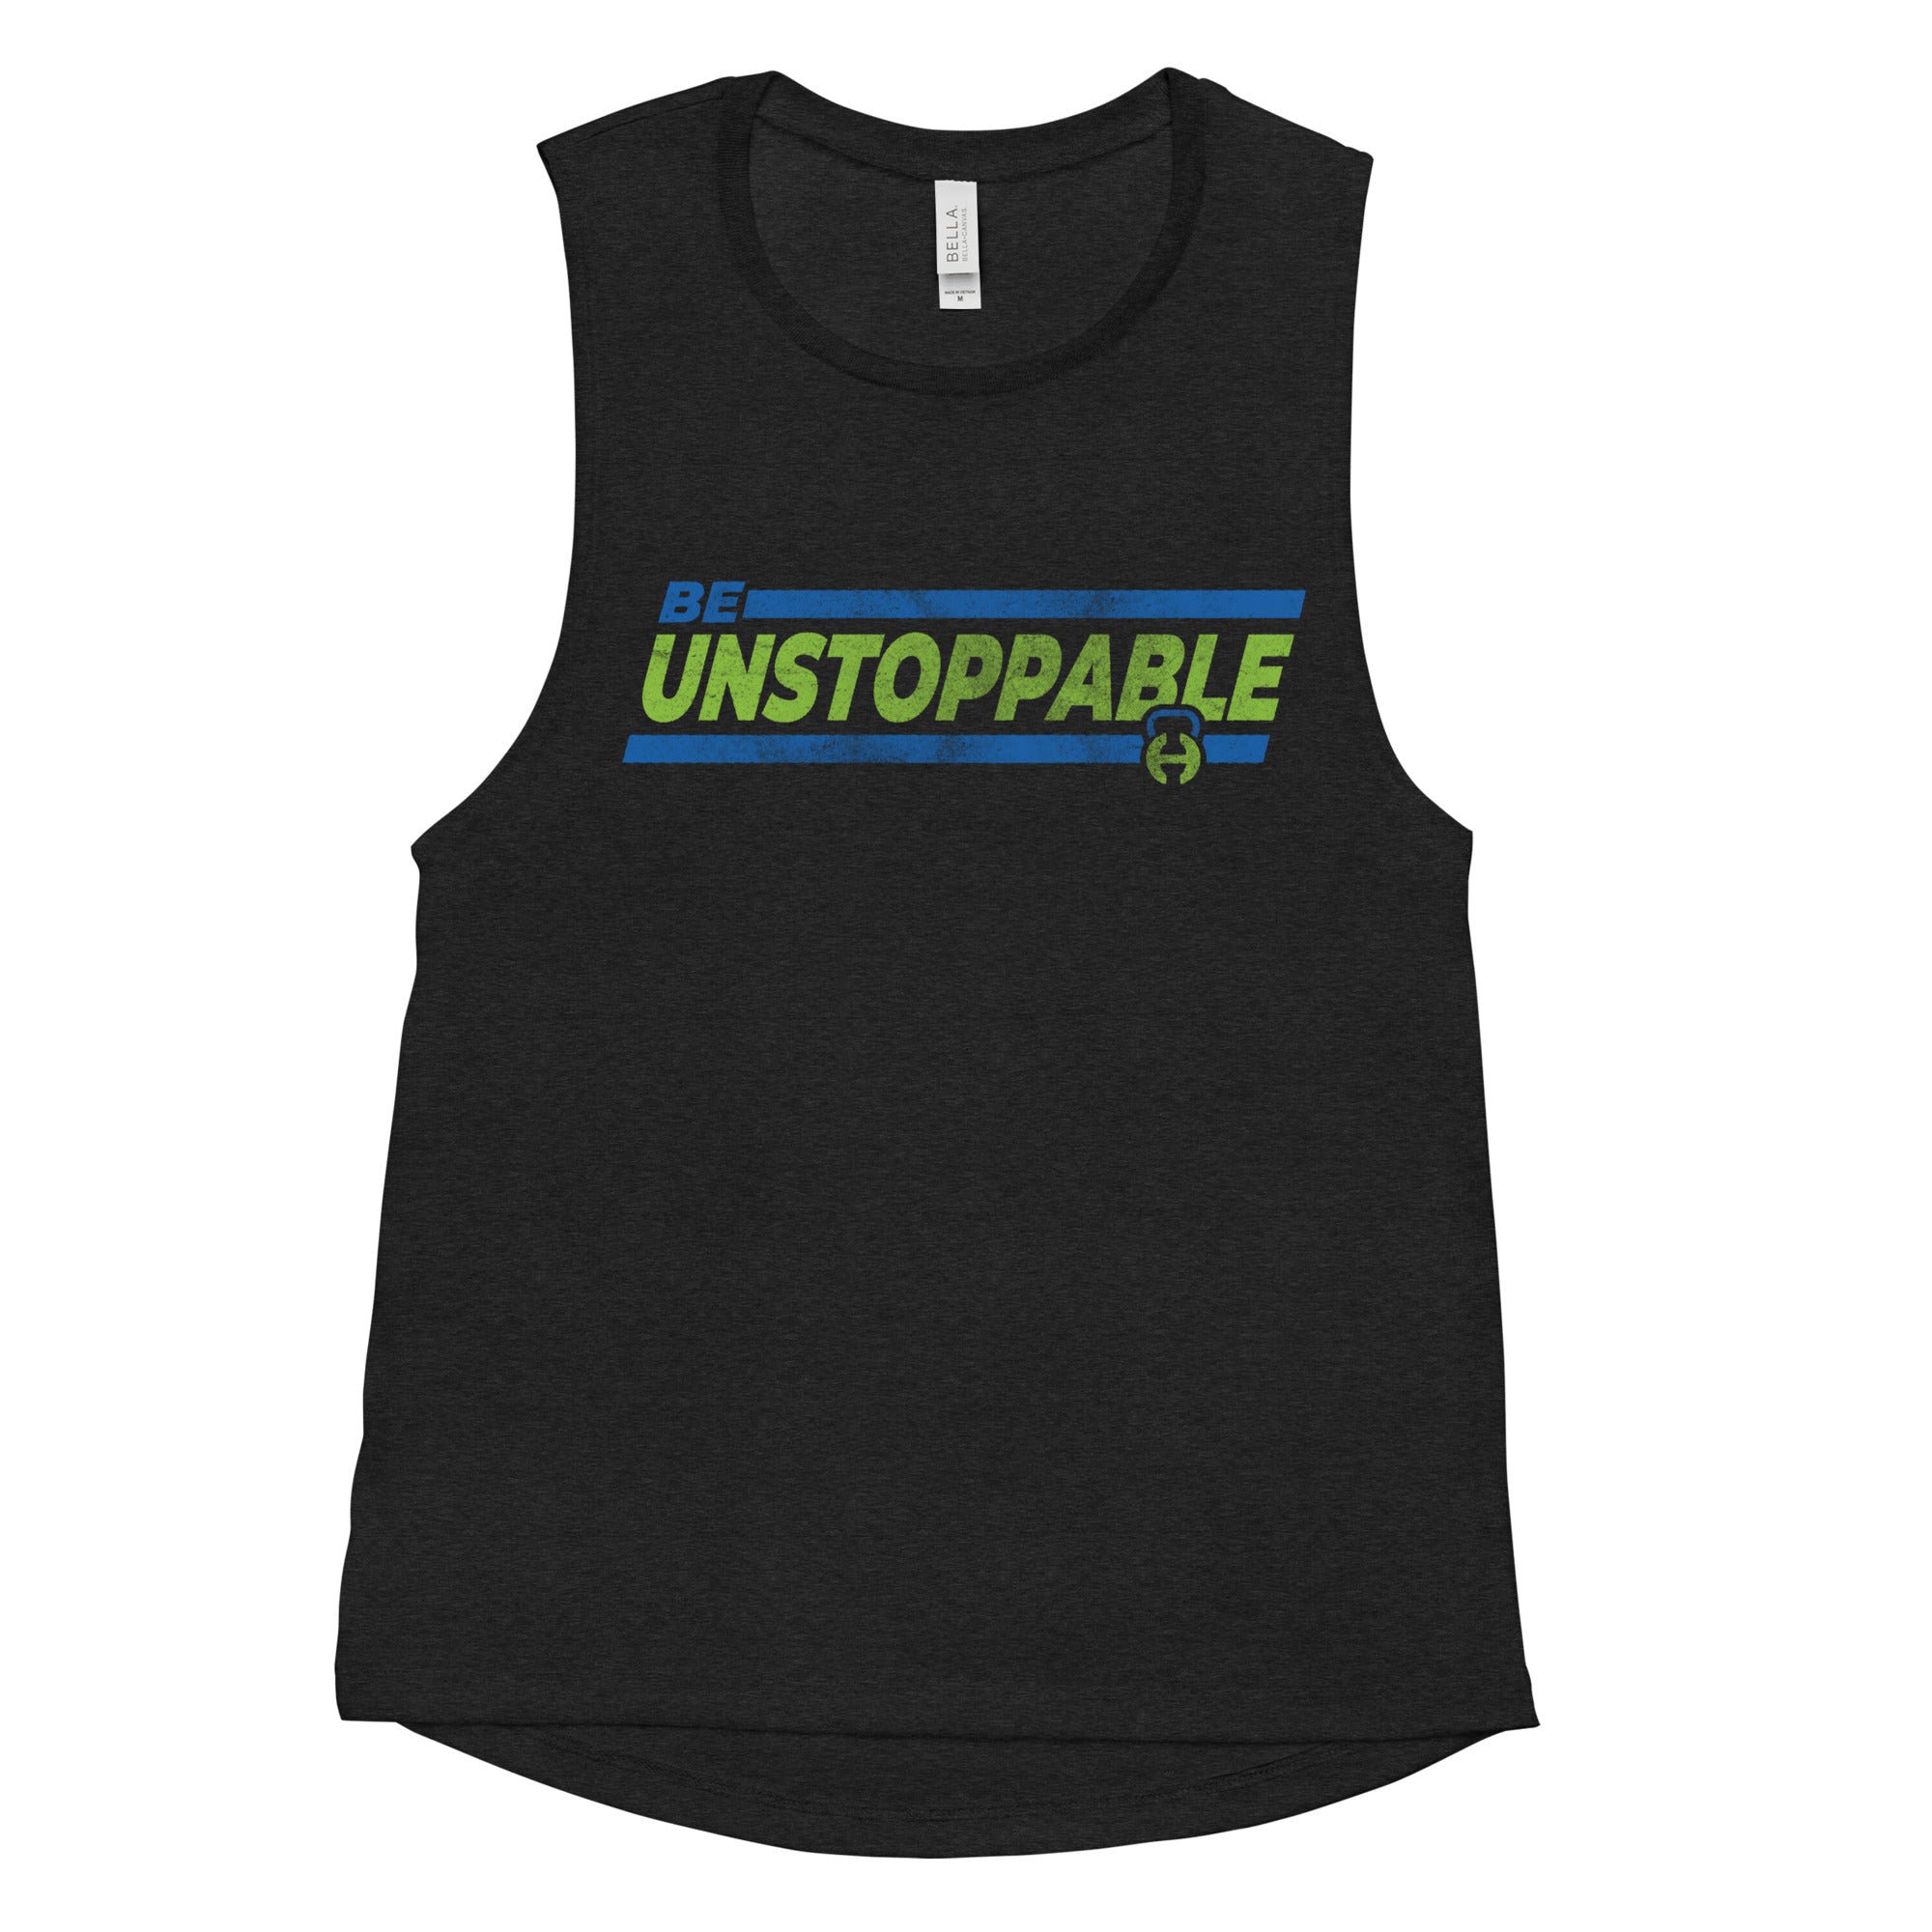 Unstoppable Challenge Ladies’ Muscle Tank